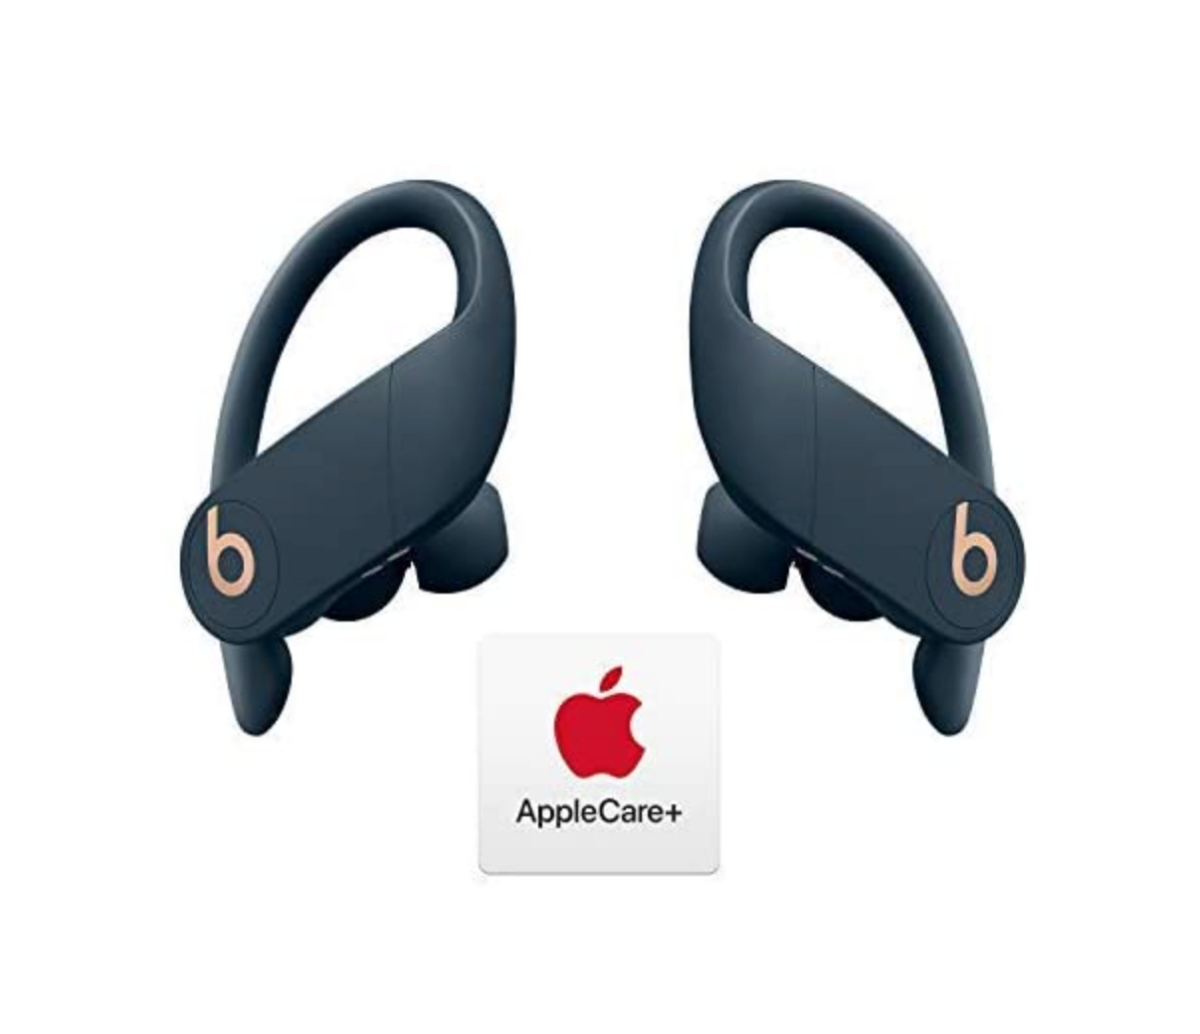 A pair of Beats Powerbeats Pro headphones with AppleCare+ promotion